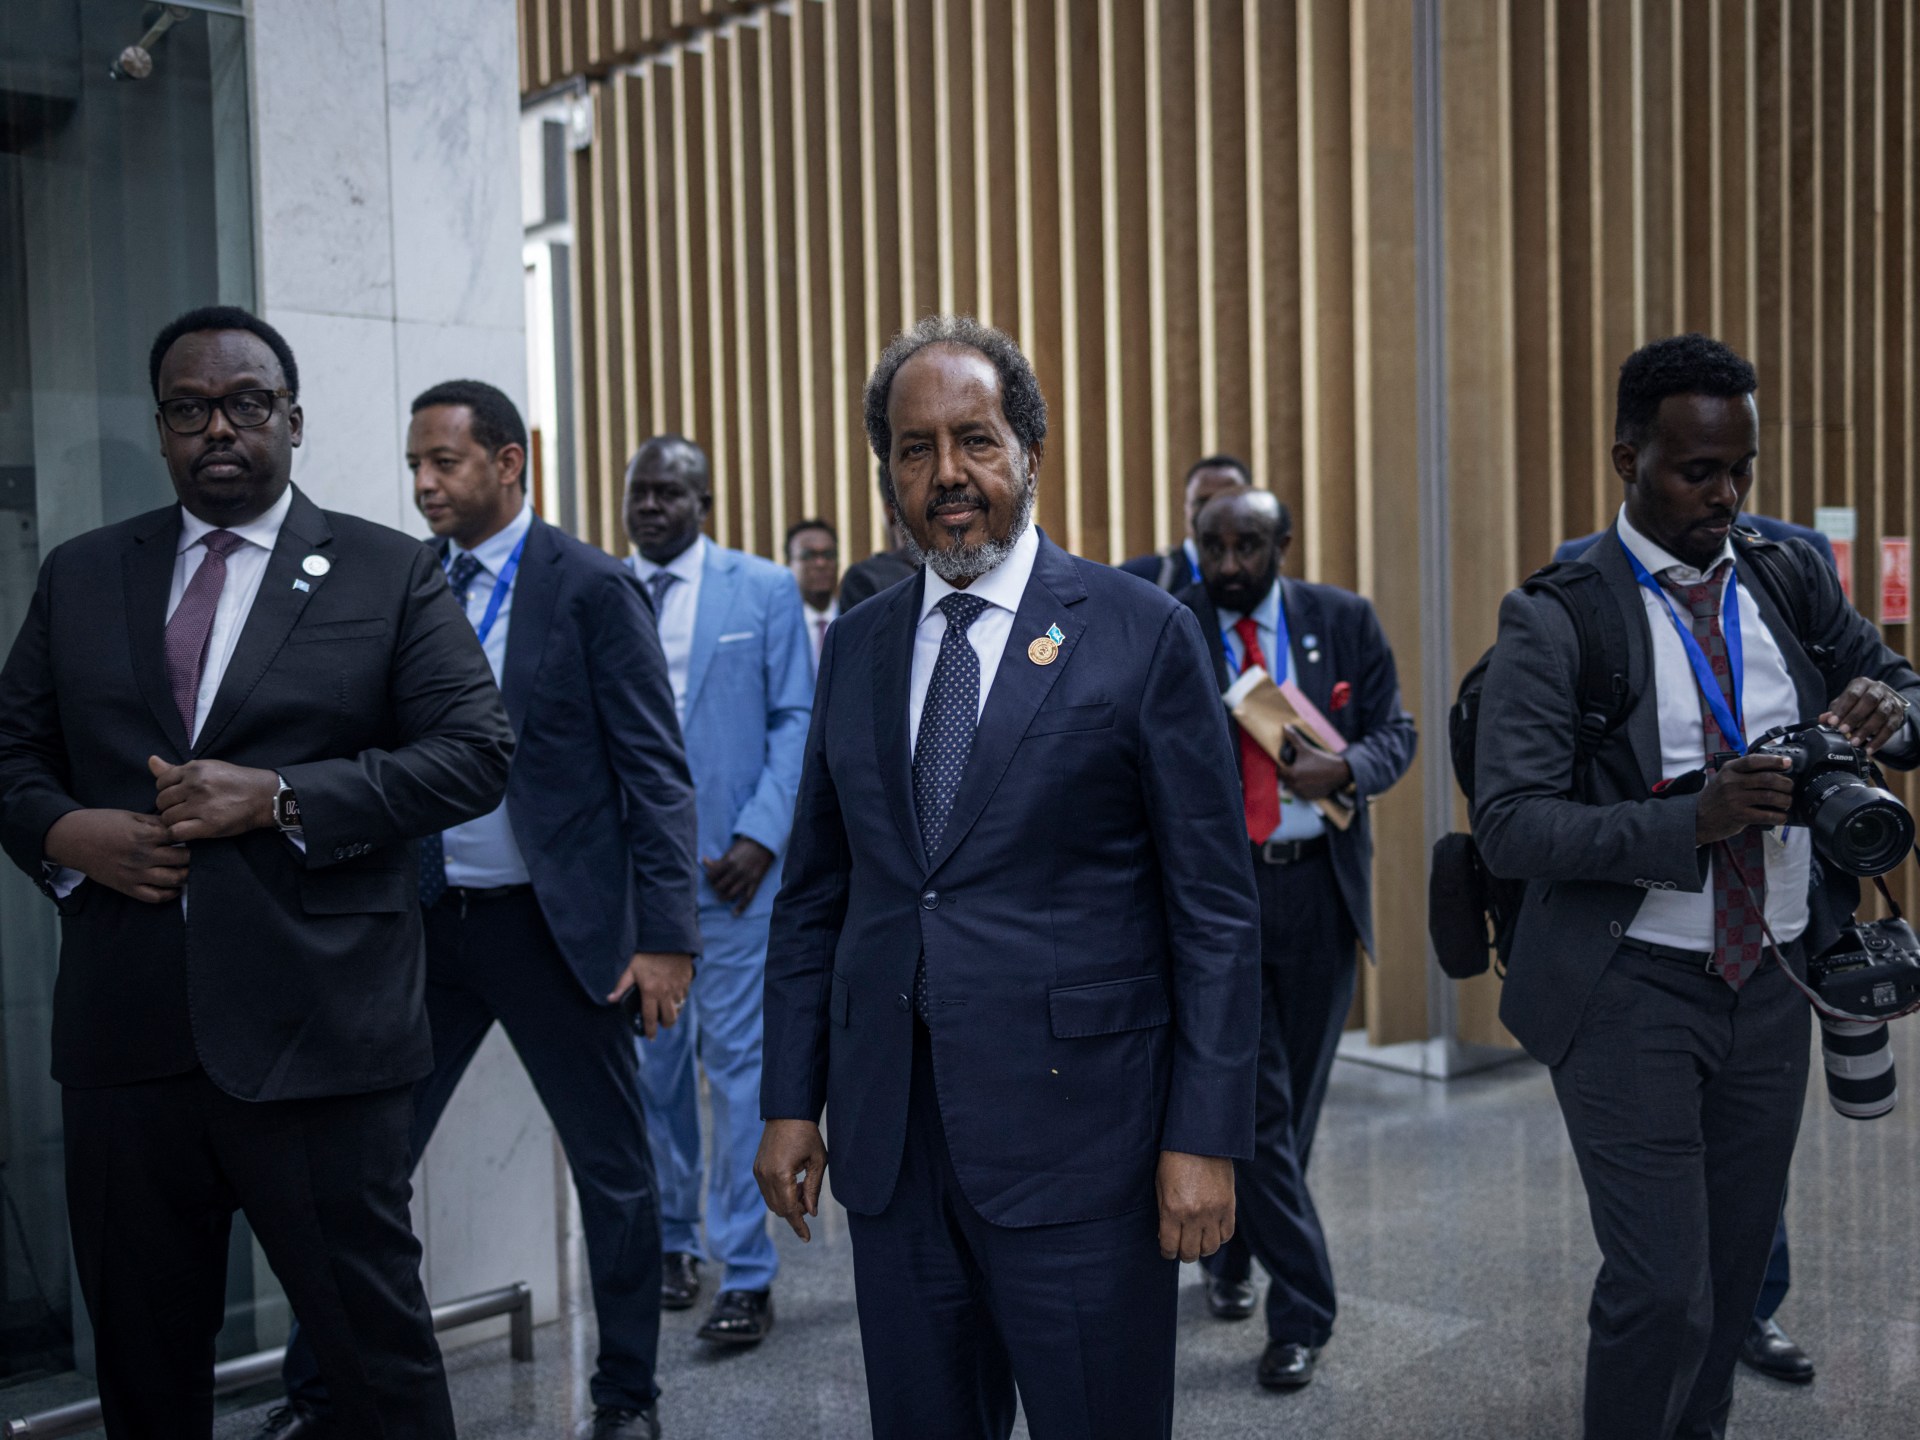 Somalia president accuses Ethiopia of trying to annex part of its territory | African Union News